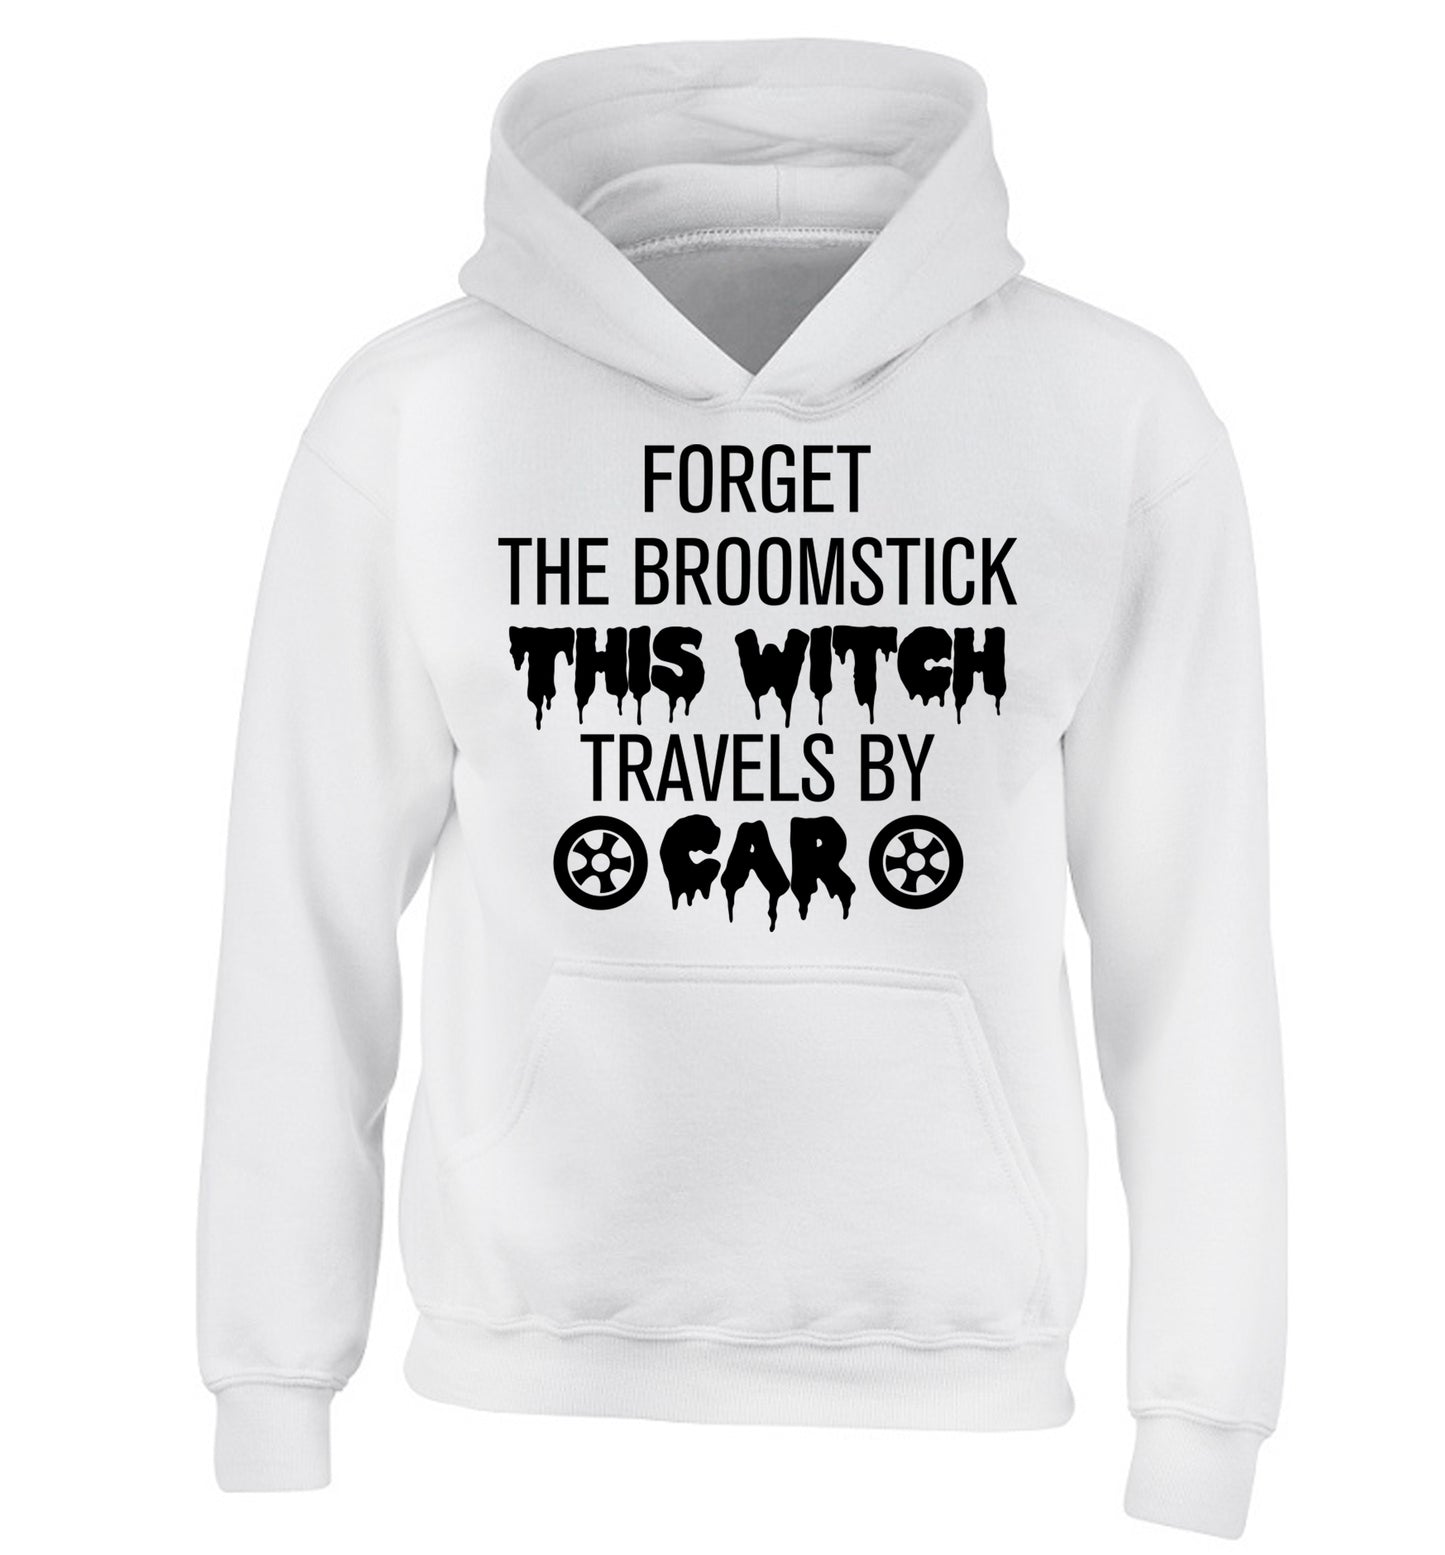 Forget the broomstick this witch travels by car children's white hoodie 12-14 Years